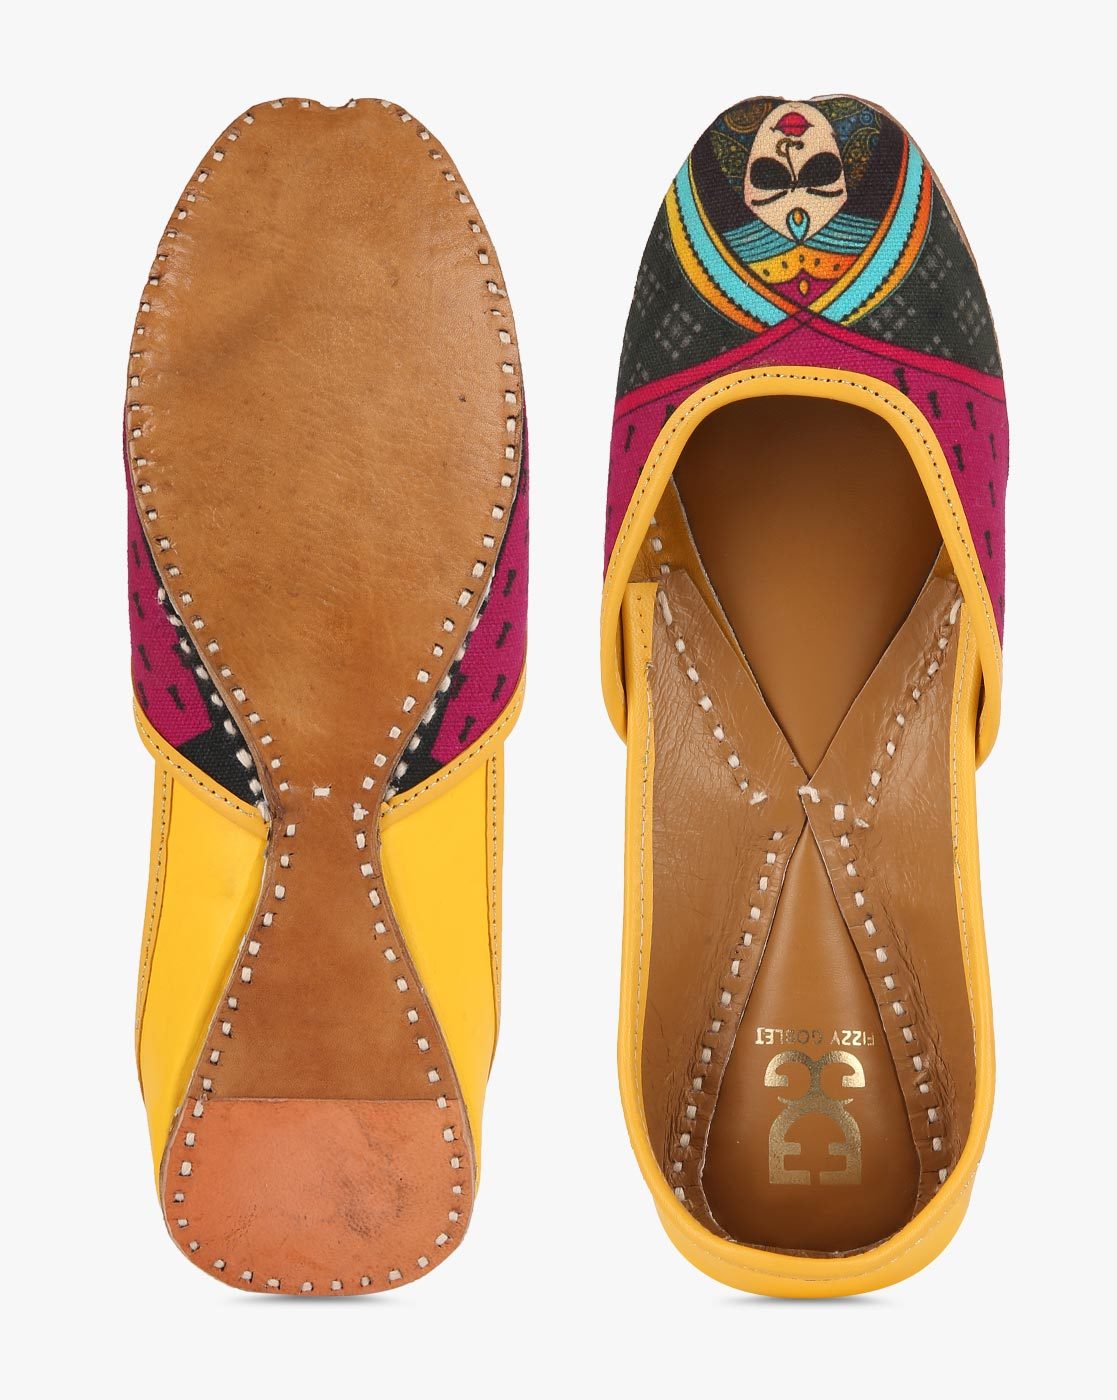 Buy Pink Flat Shoes for Women by Fizzy Goblet Online